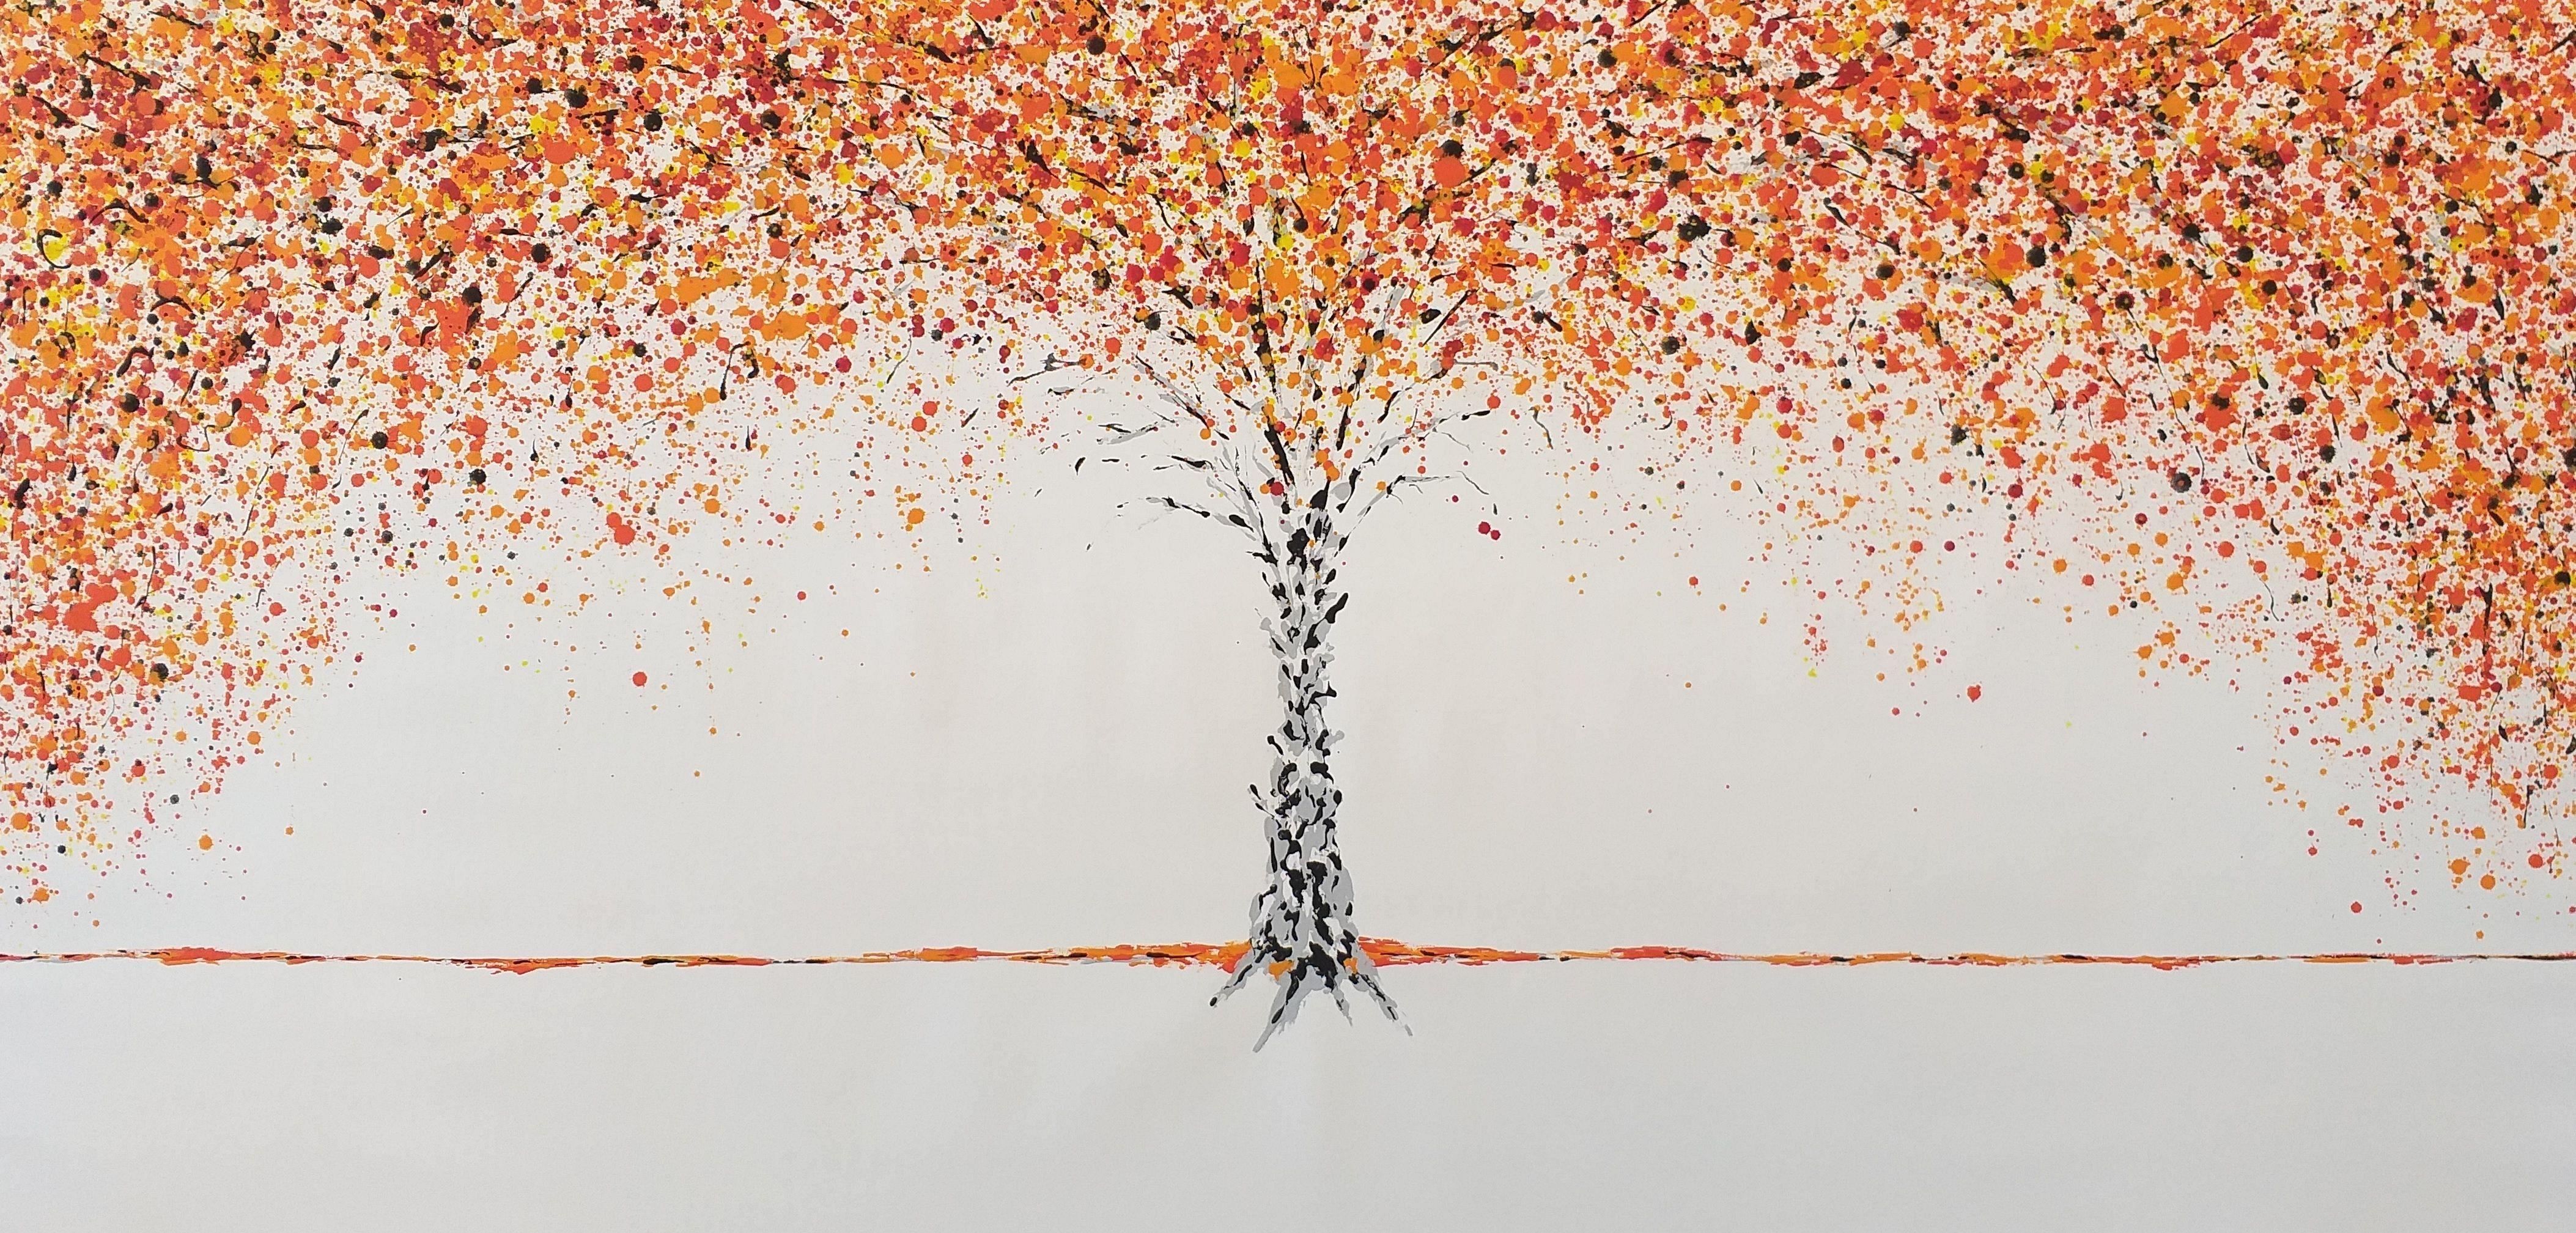 Max Yaskin Abstract Painting - Autumn Tree 3 by M.Y., Painting, Acrylic on Canvas